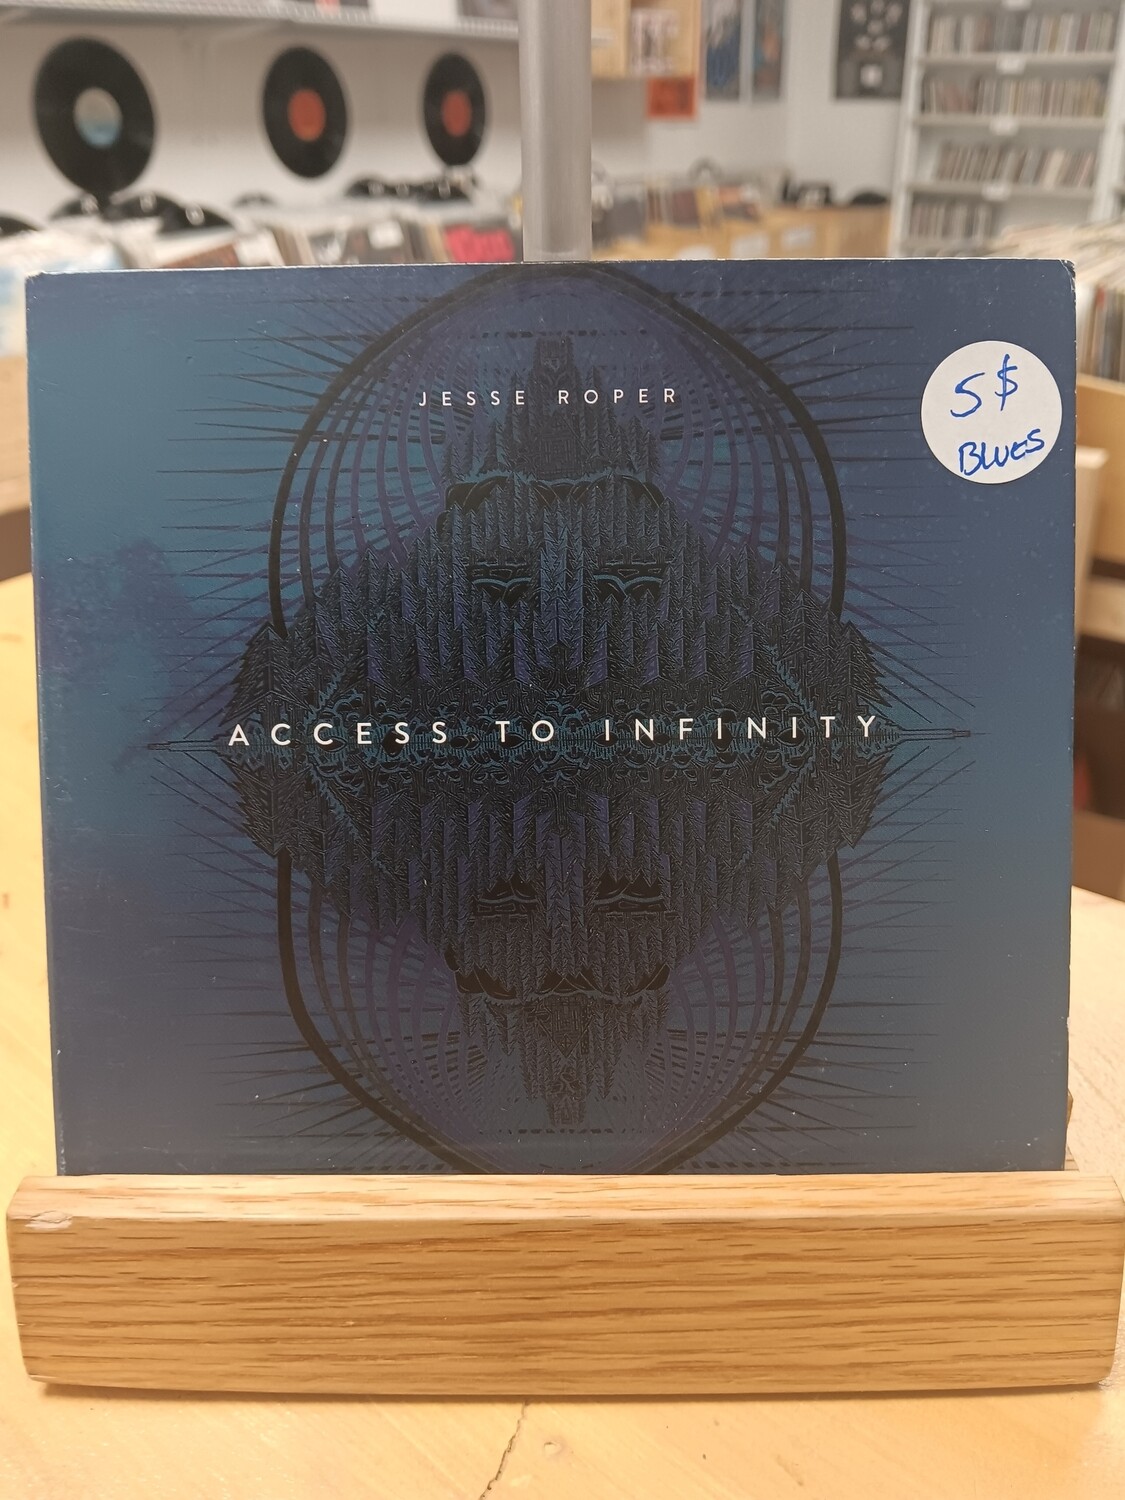 Jesse Roper - Access to infinity (CD)